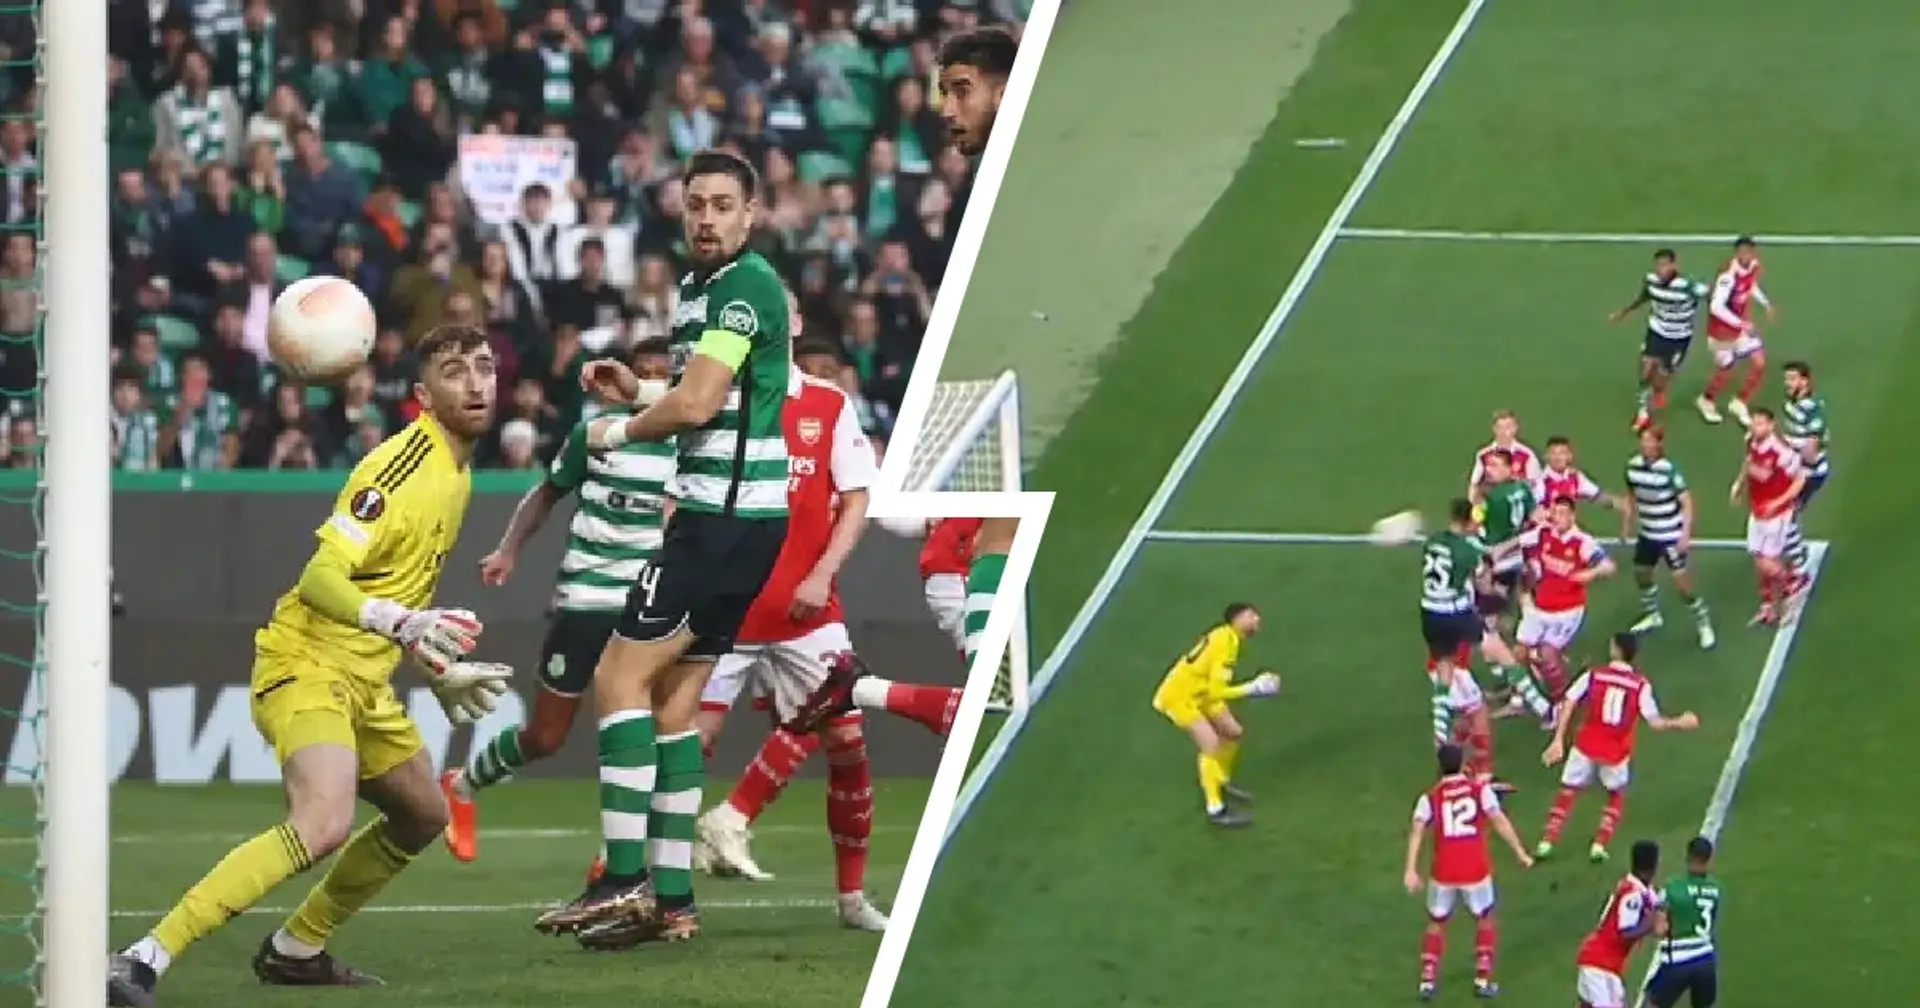 SPOTTED: Matt Turner's error that led to Sporting's first goal - Kiwior was involved 